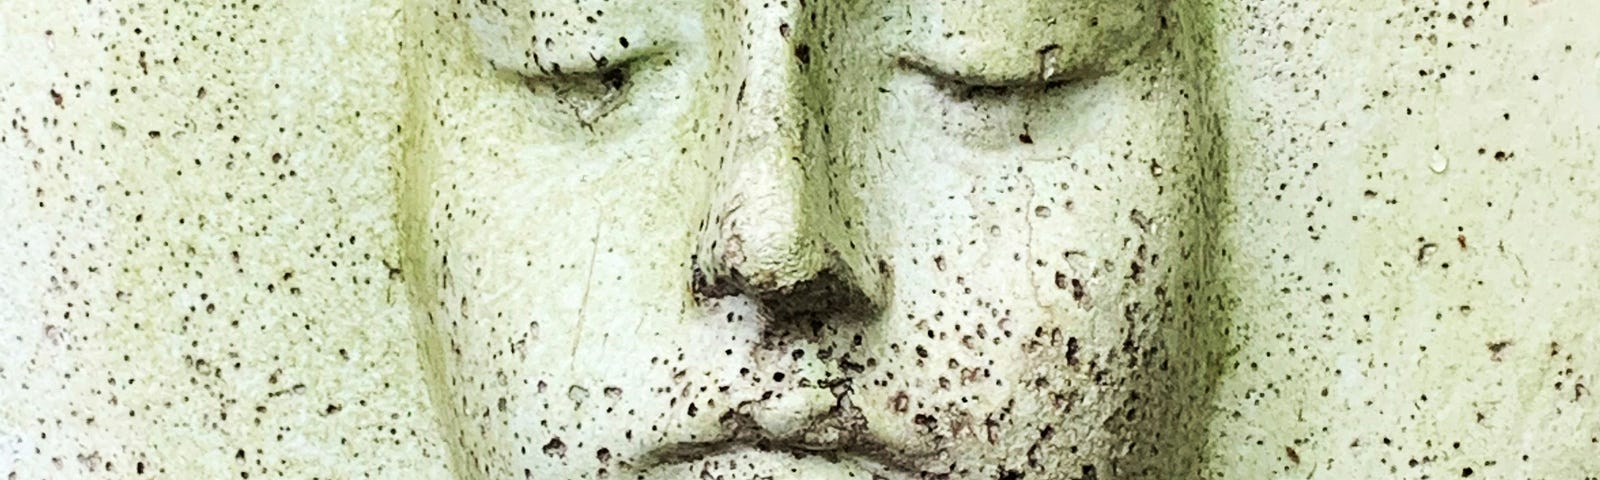 An expression-less face carved from stone